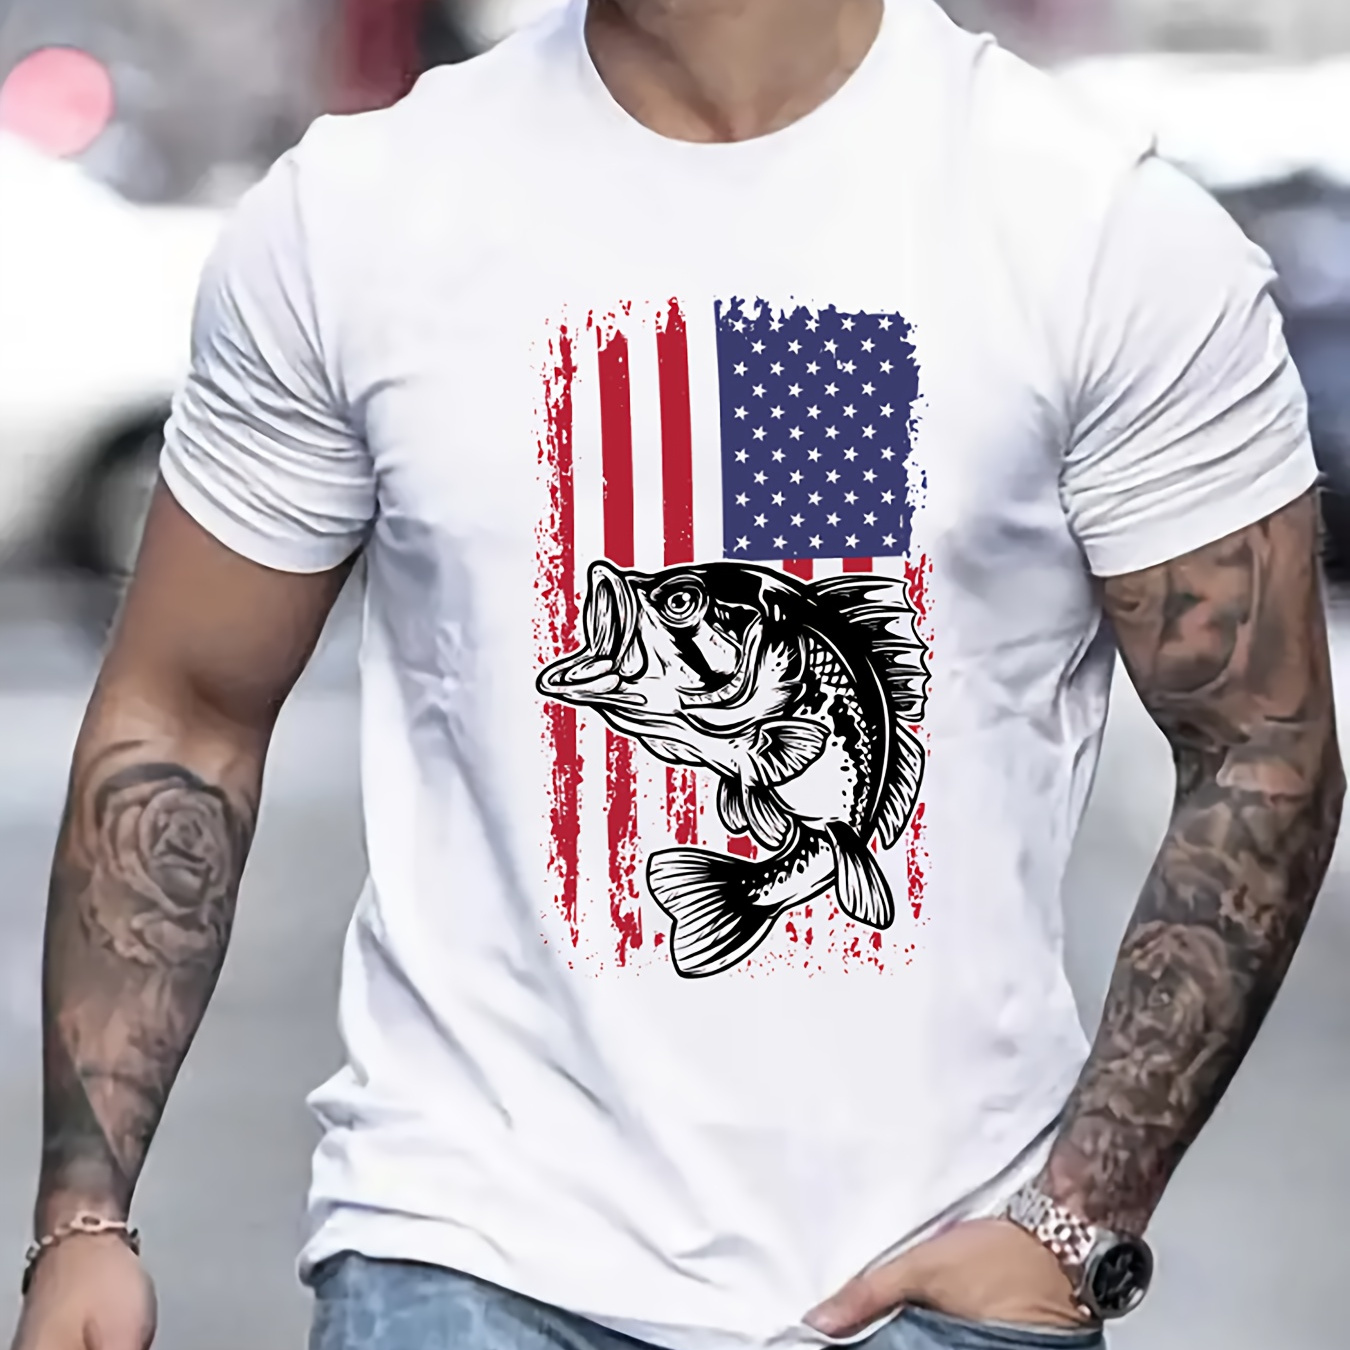 Big Fish Print, Men's Graphic Design Crew Neck Novel T-shirt, Casual Comfy  Tees Tshirts For Summer, Men's Clothing Tops For Daily Vacation Resorts